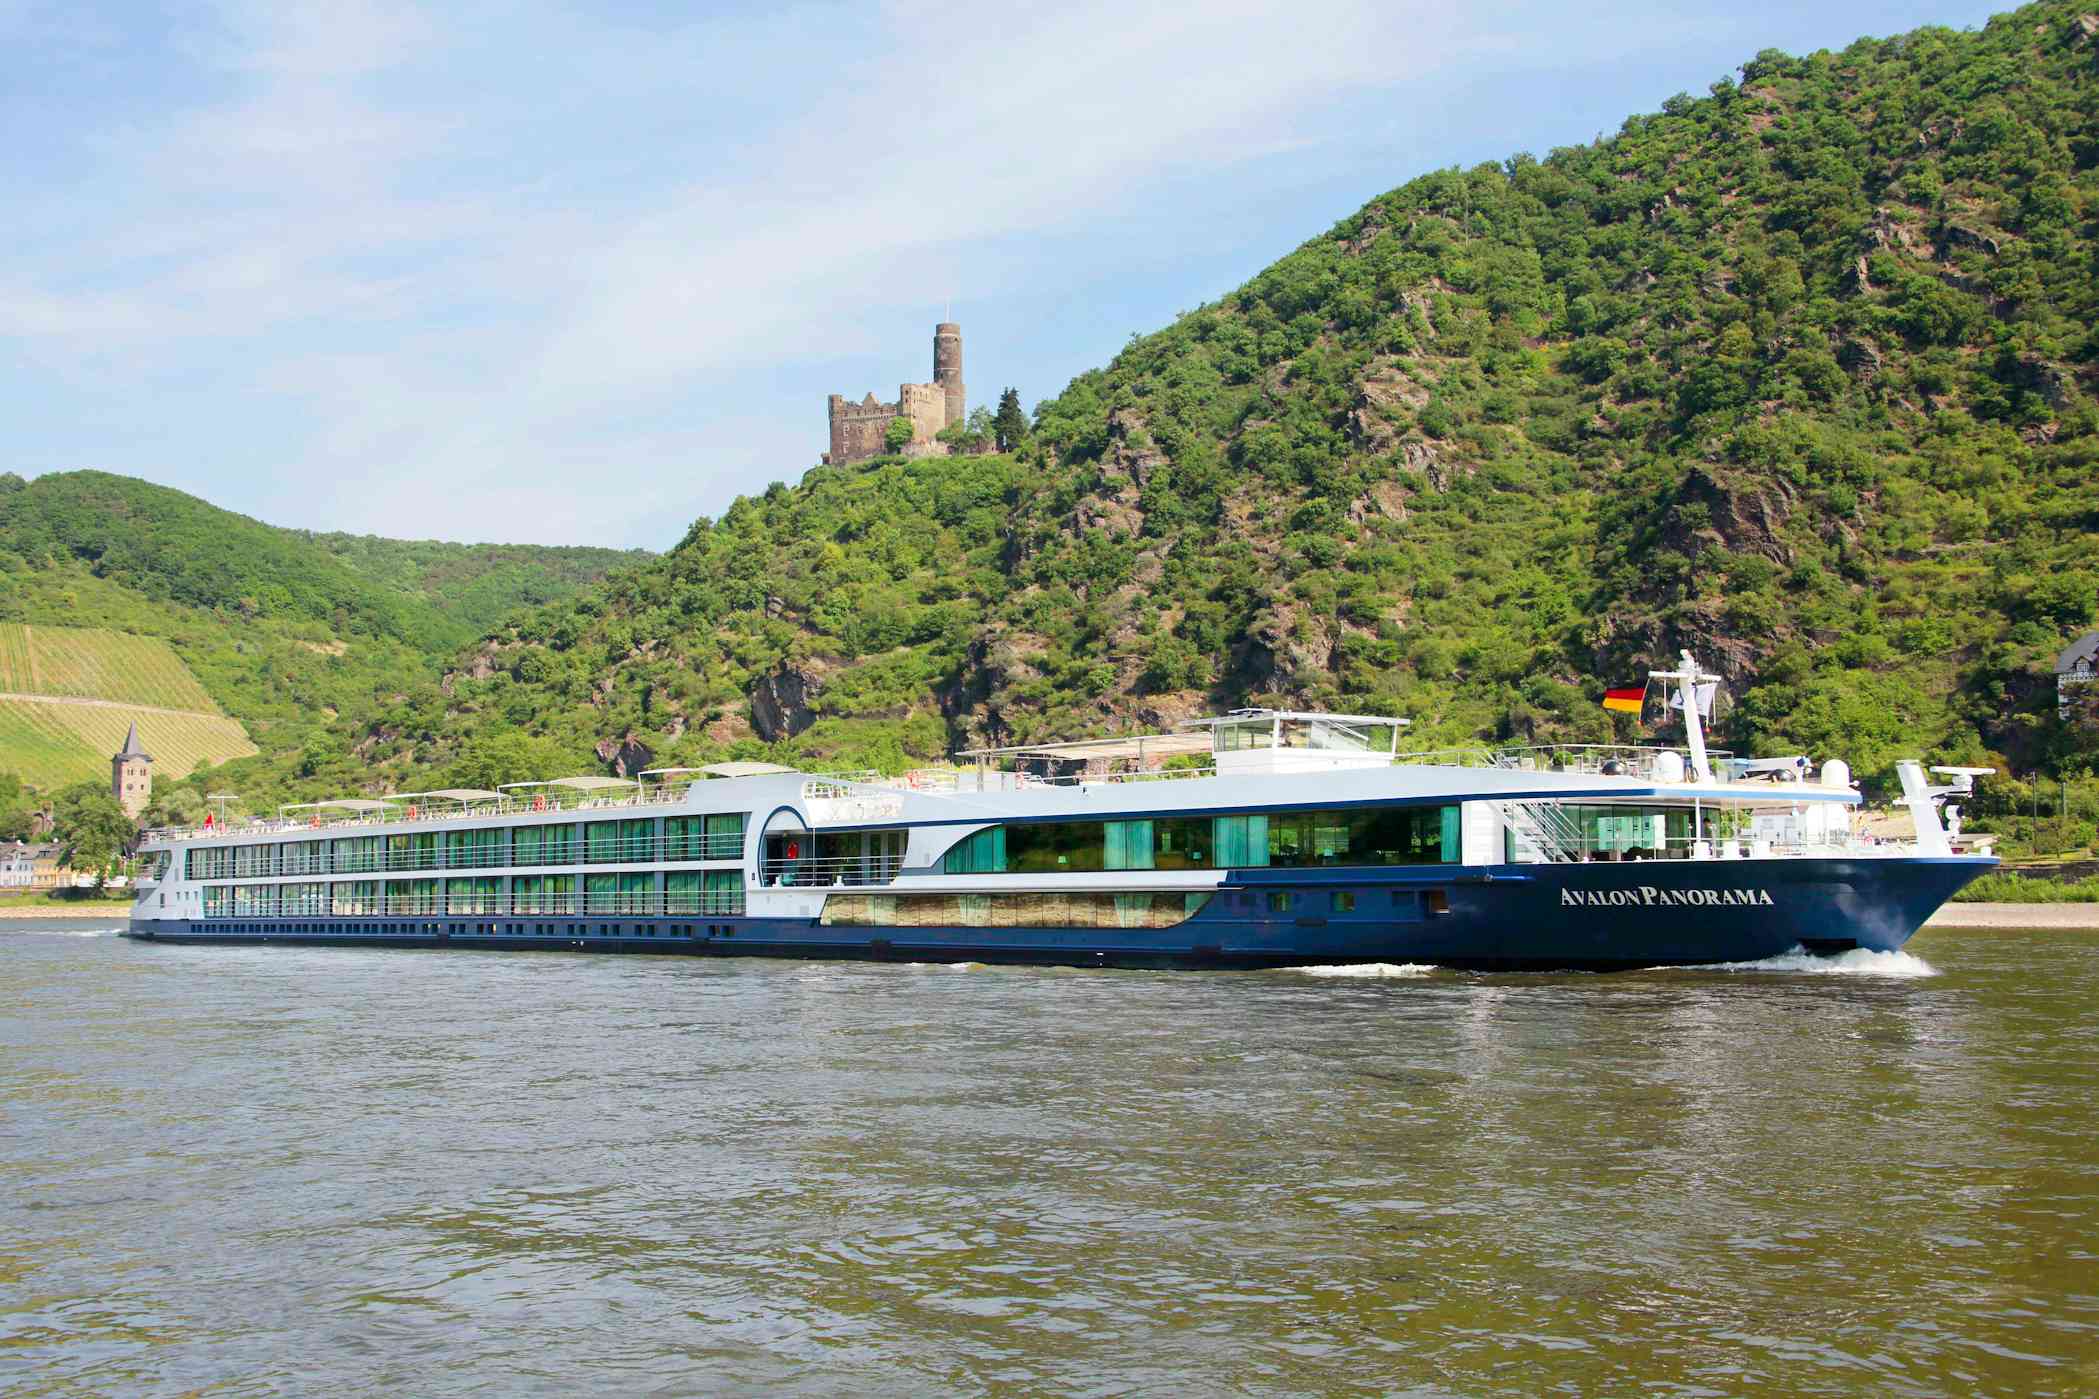 Rhine River Cruise Prices: 5 Steps for Finding a Good Deal